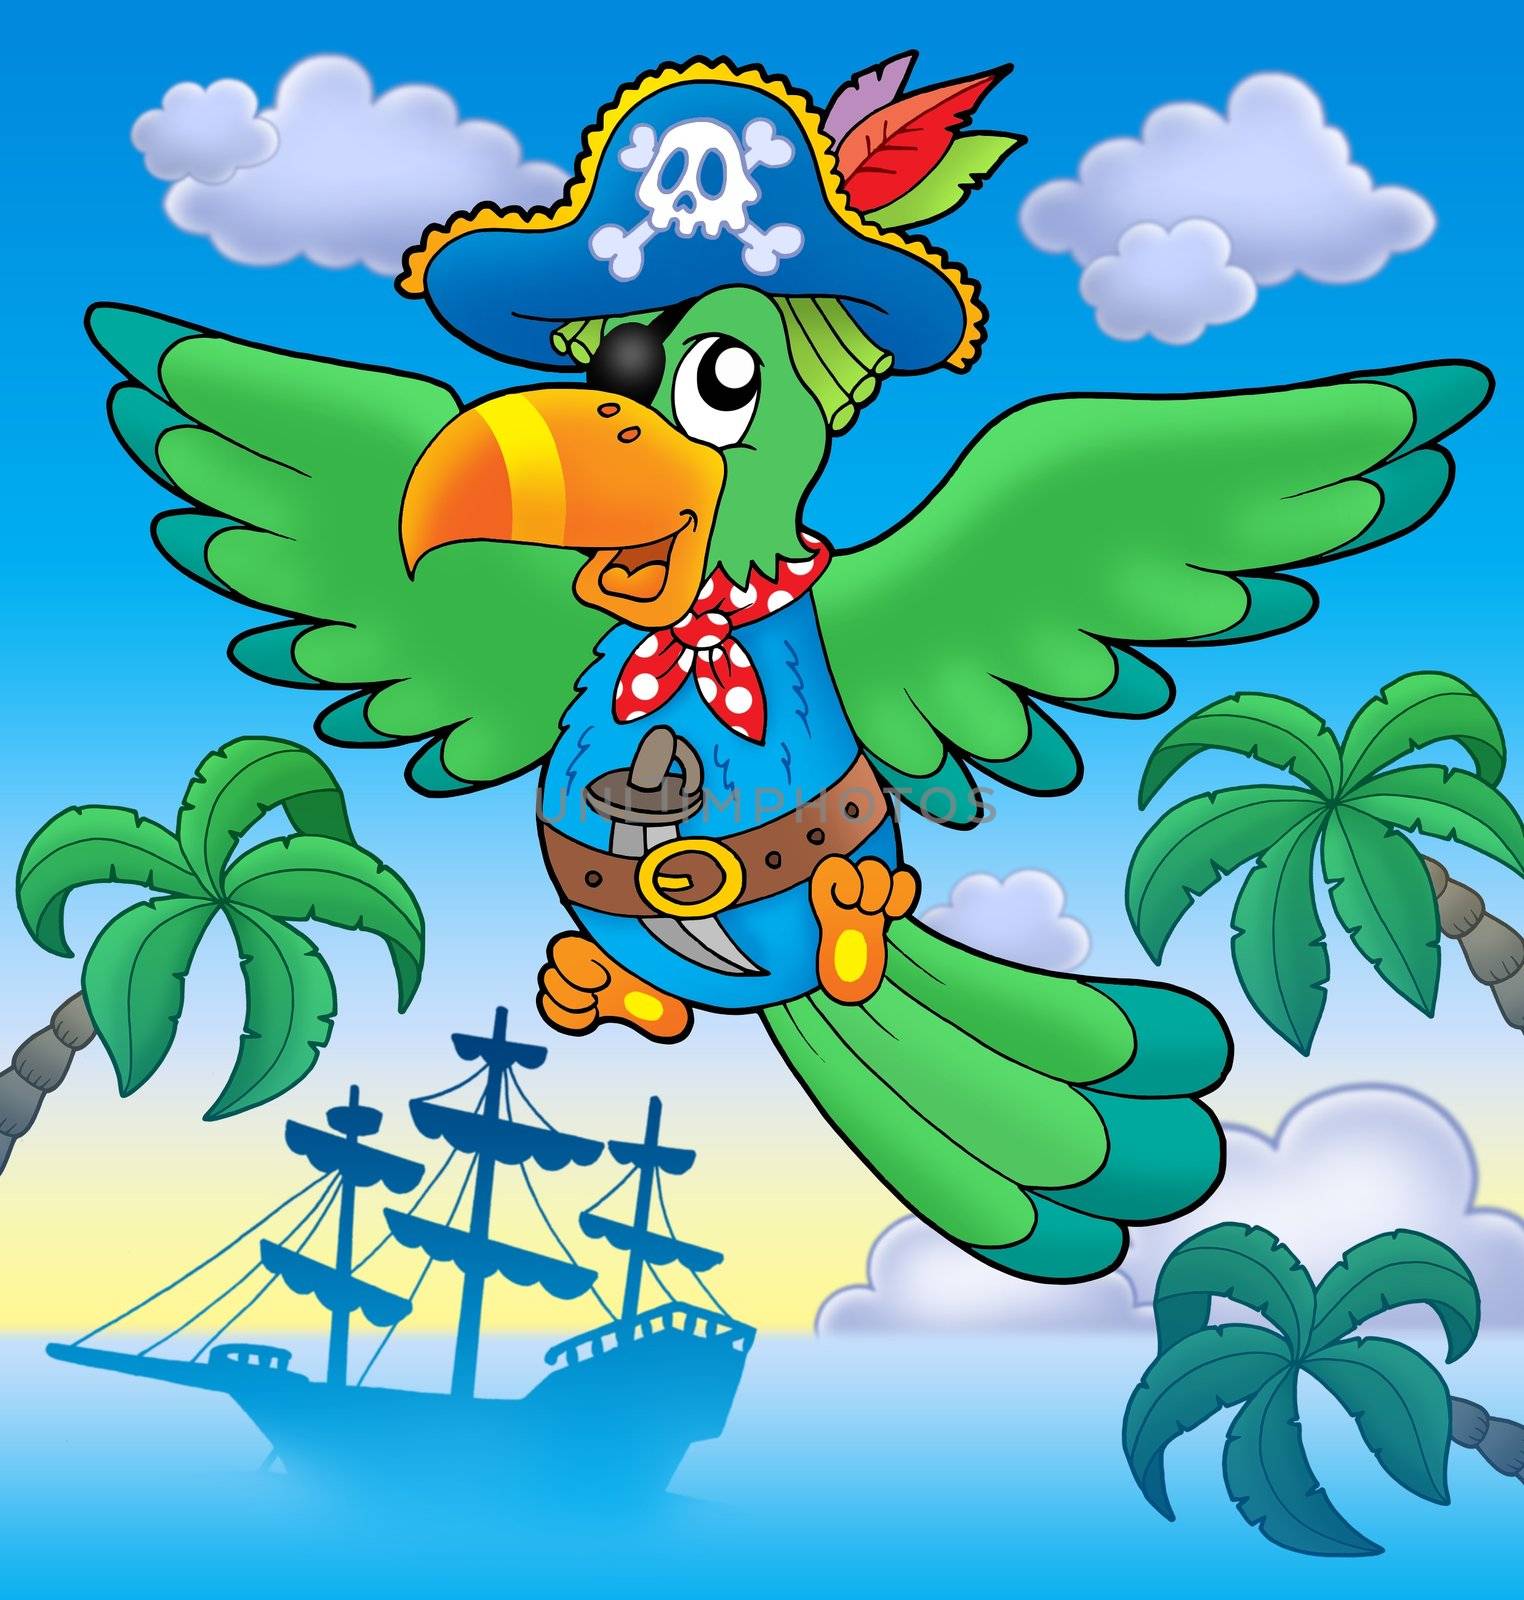 Flying pirate parrot with boat - color illustration.